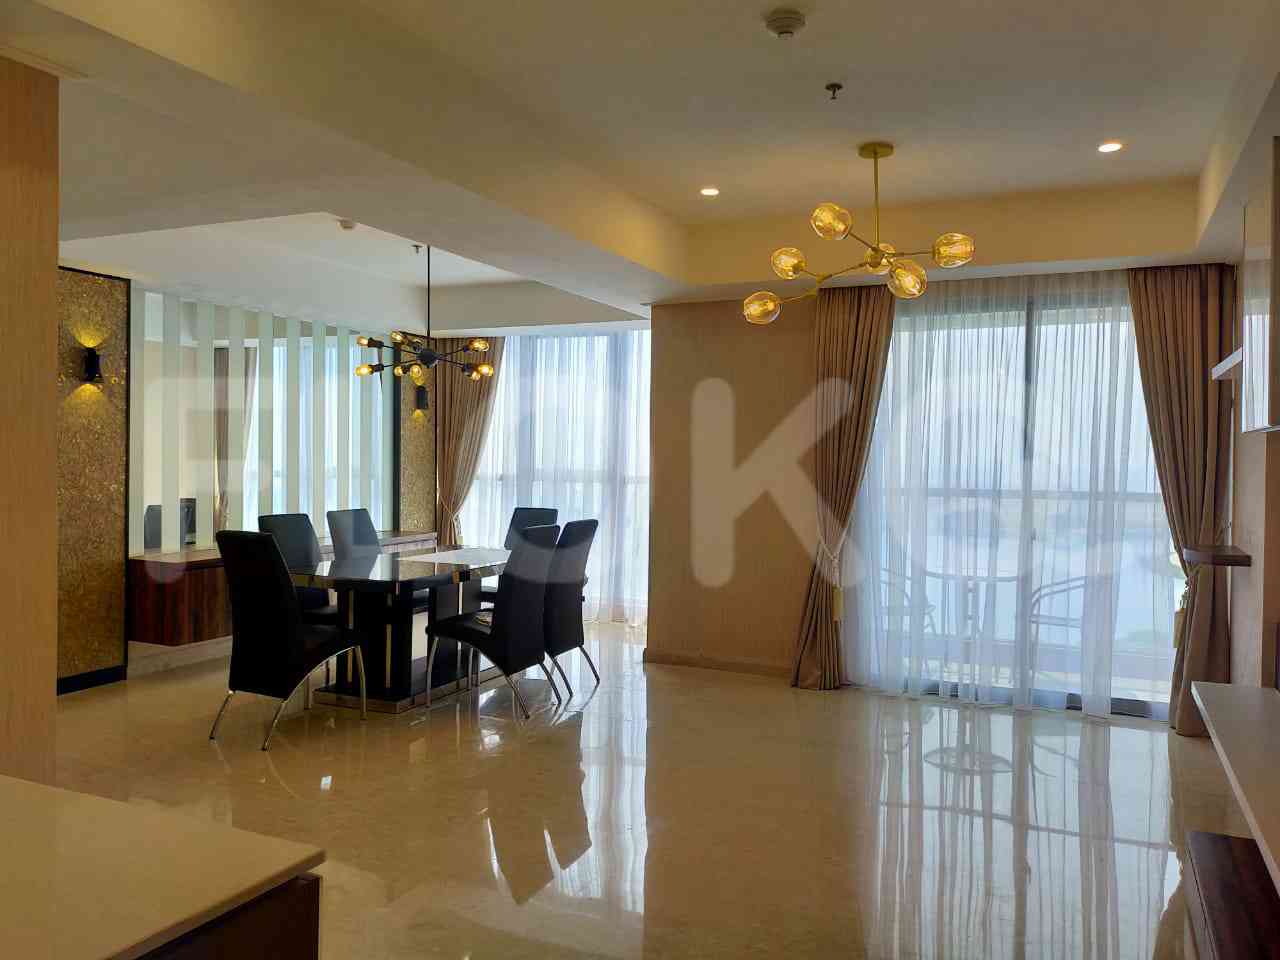 3 Bedroom on 13th Floor for Rent in Gold Coast Apartment - fka11a 8